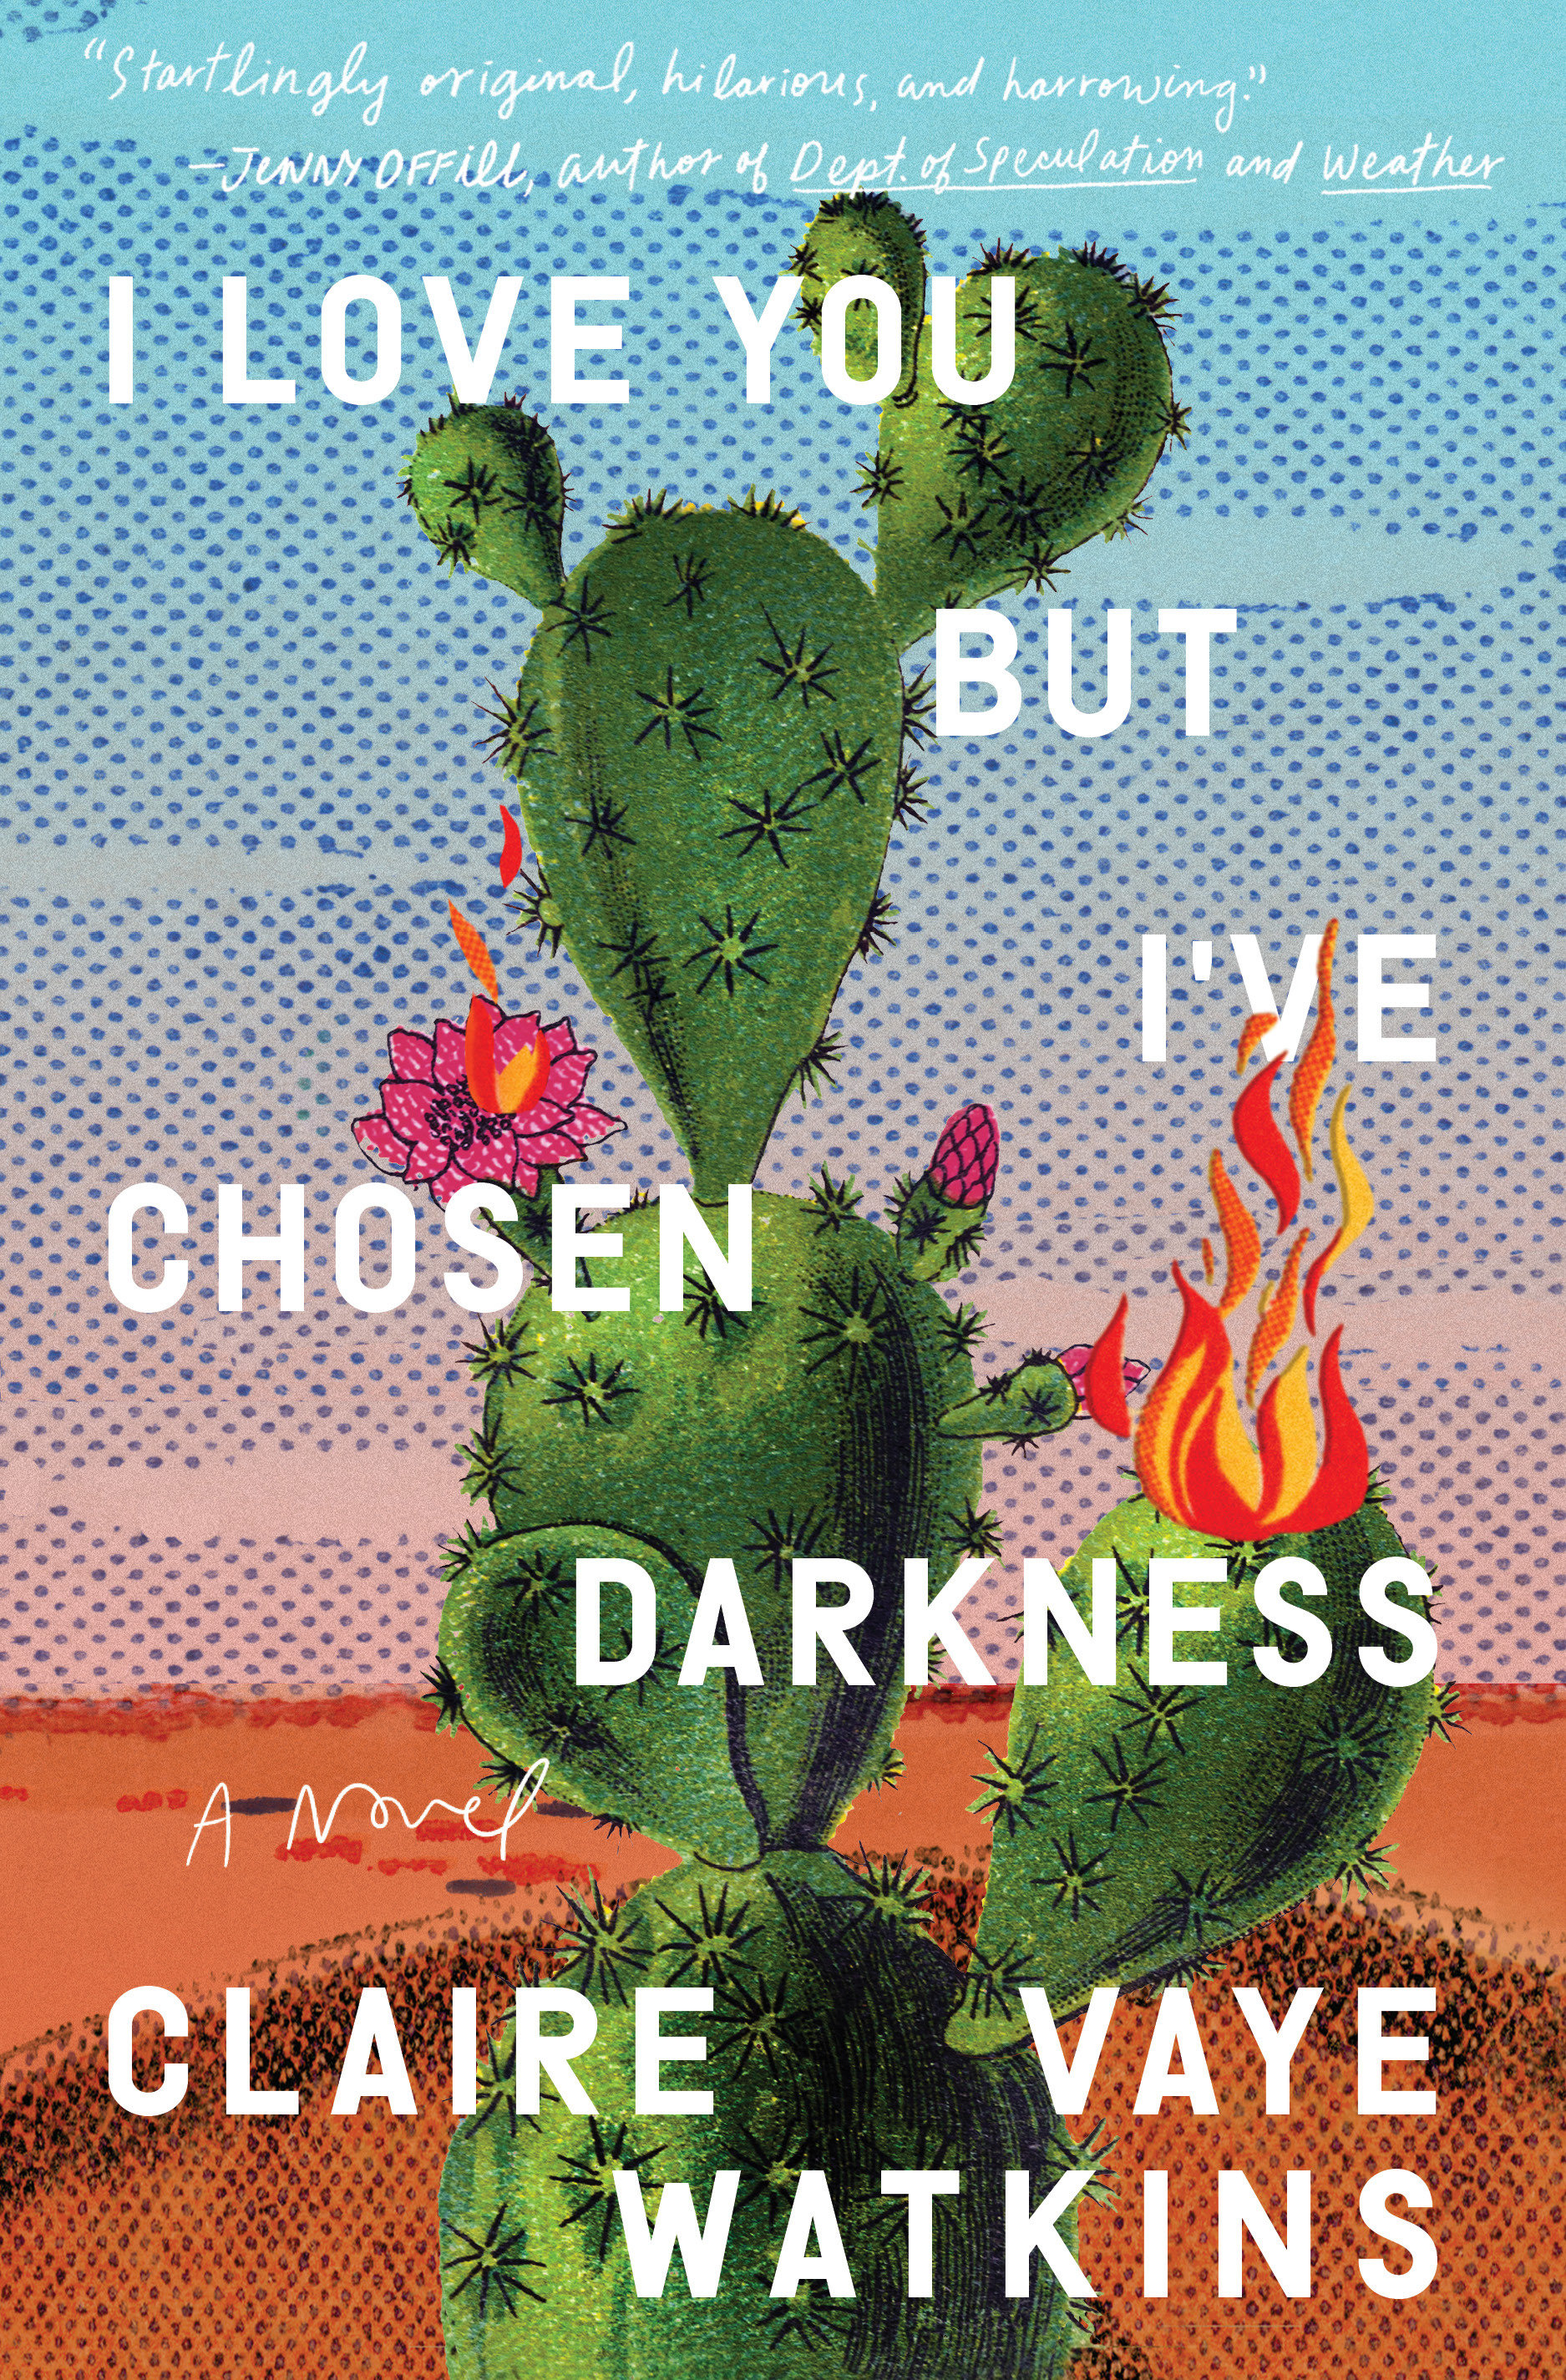 I Love You But I'Ve Chosen Darkness (Hardcover Book)